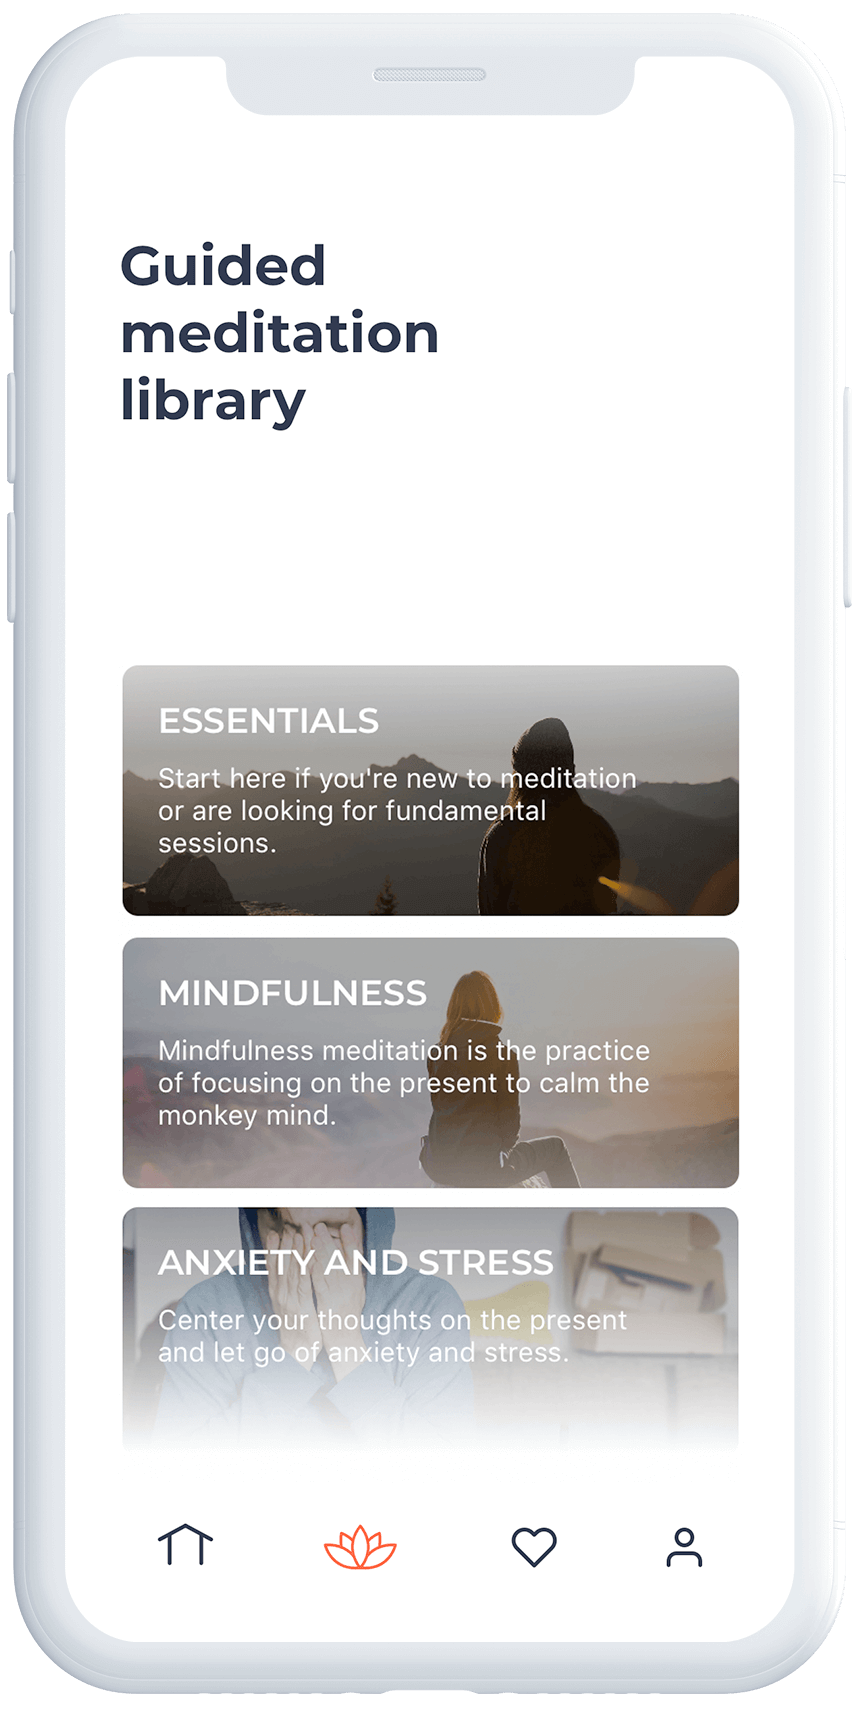 the guided meditation library app on an iphone.